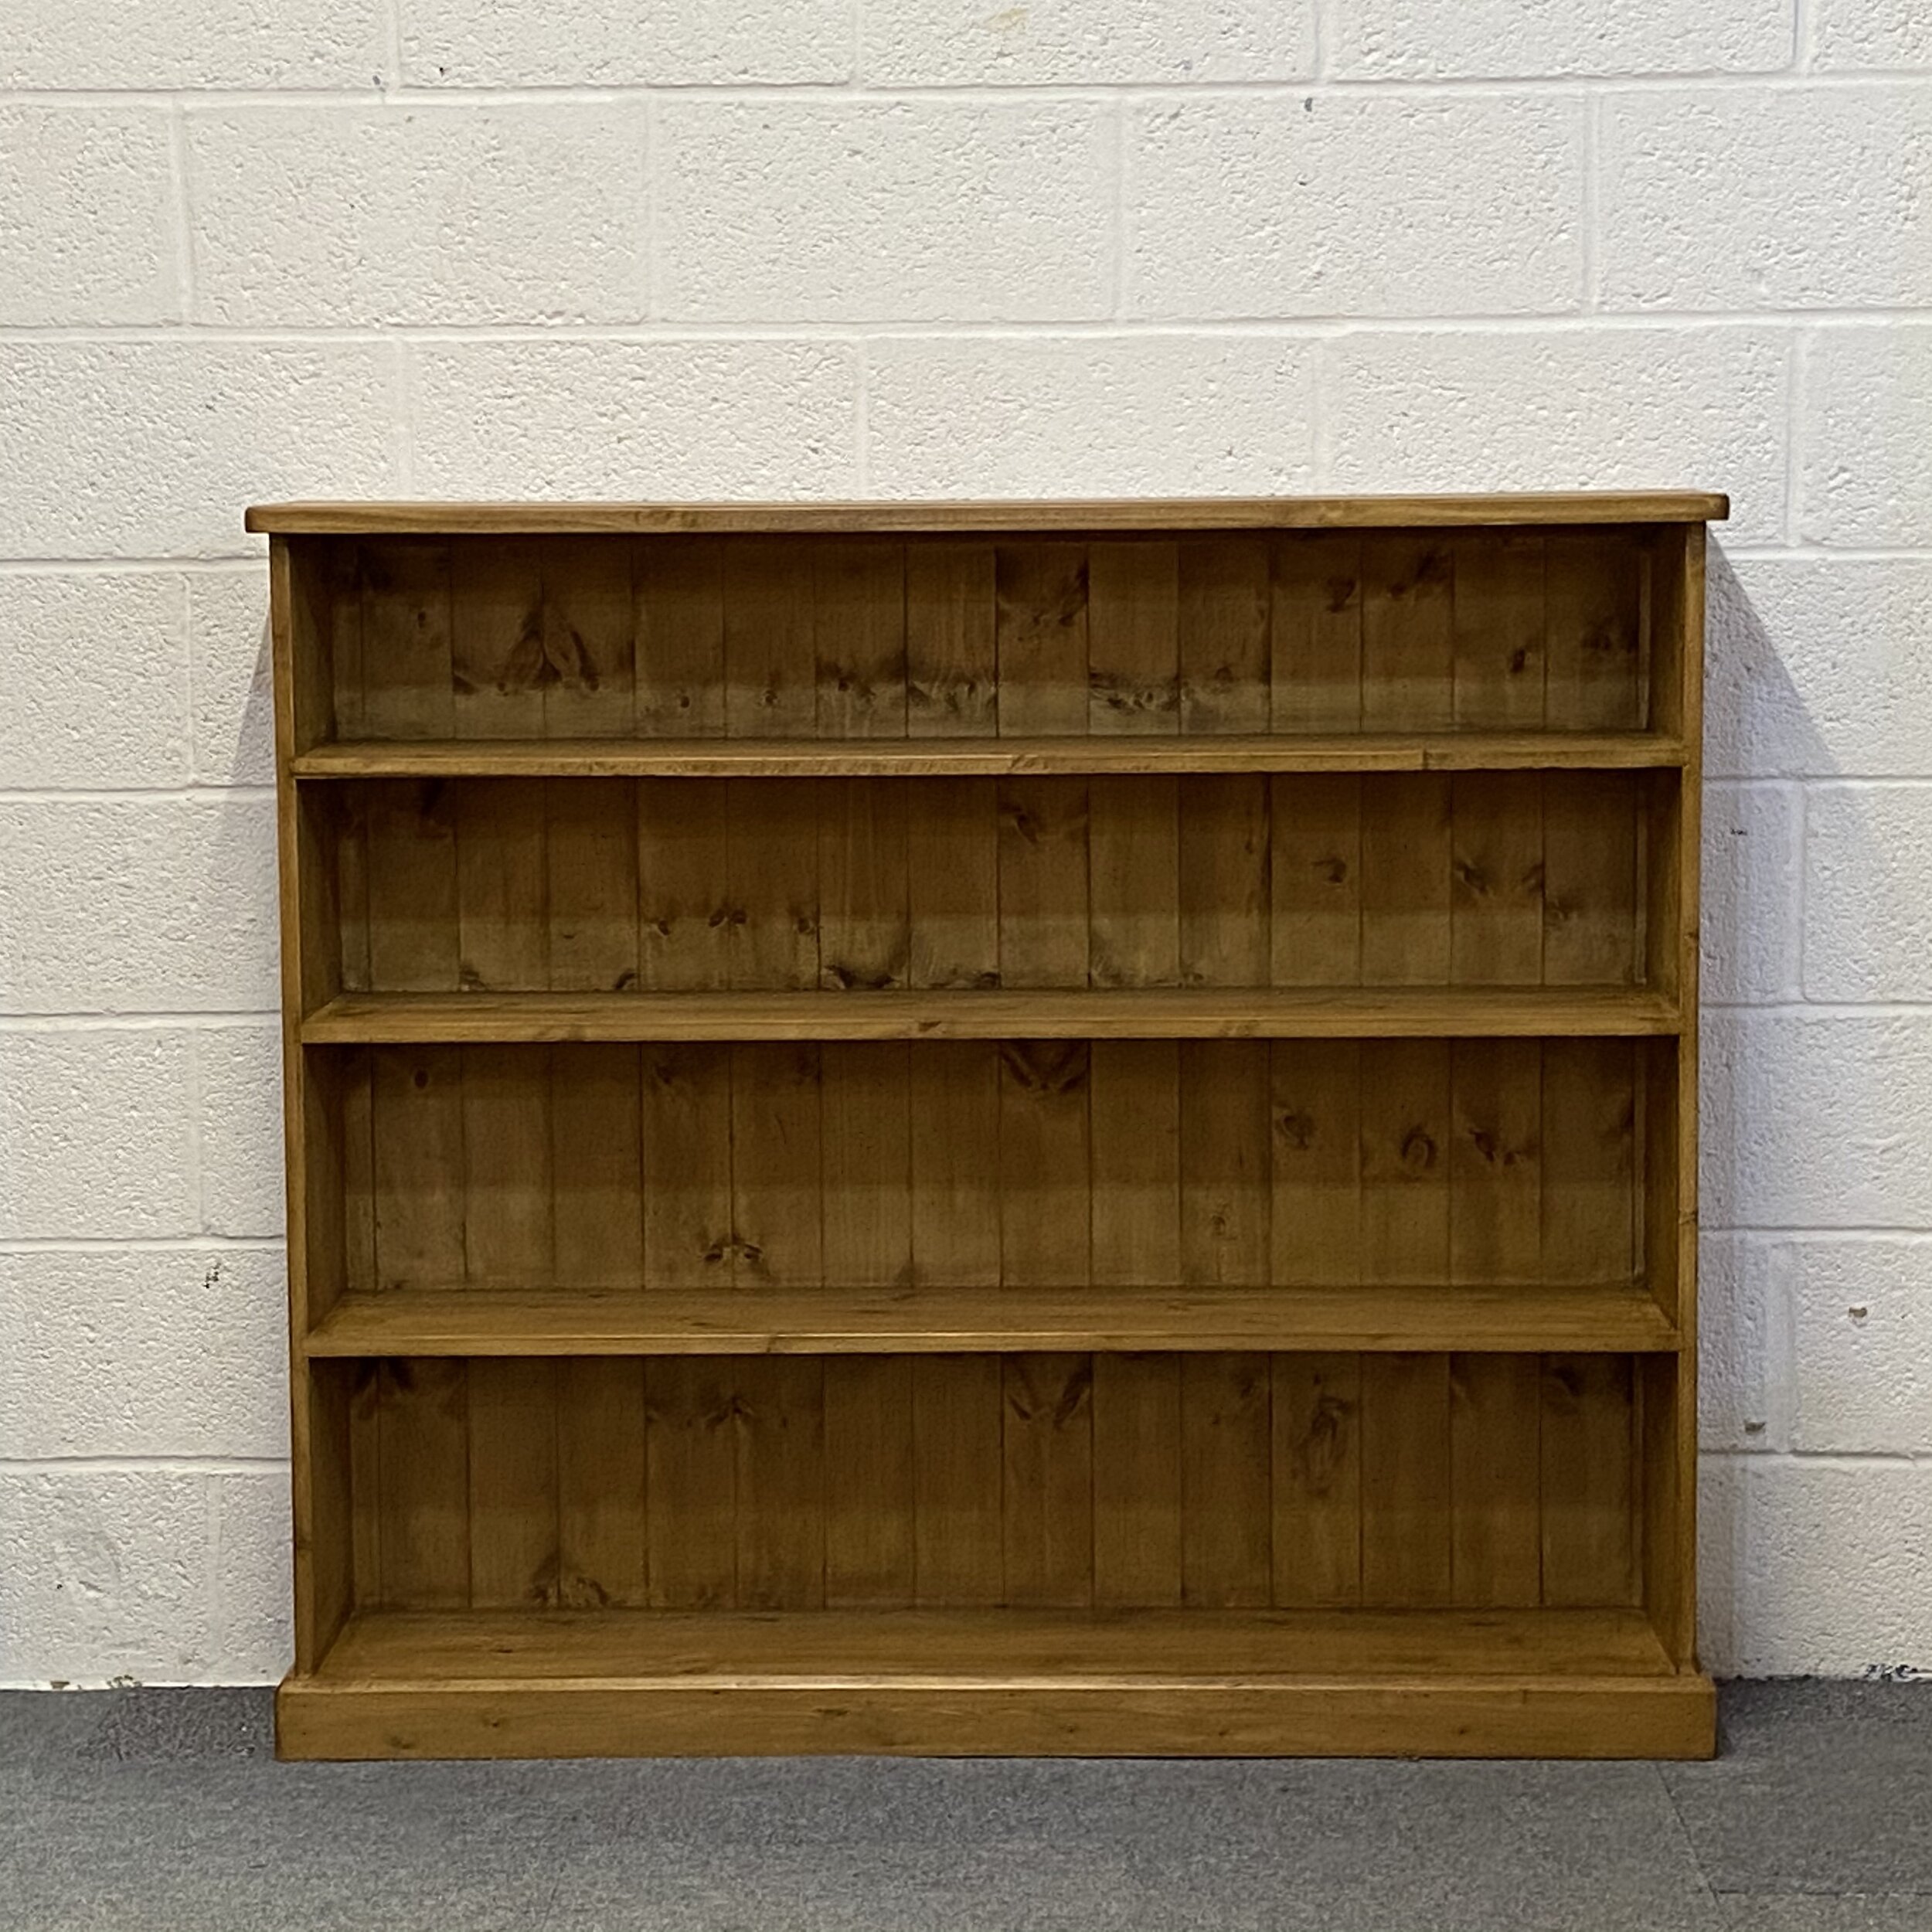 Pine Bookcase With 3 Shelves E4153b Pinefinders Old Pine